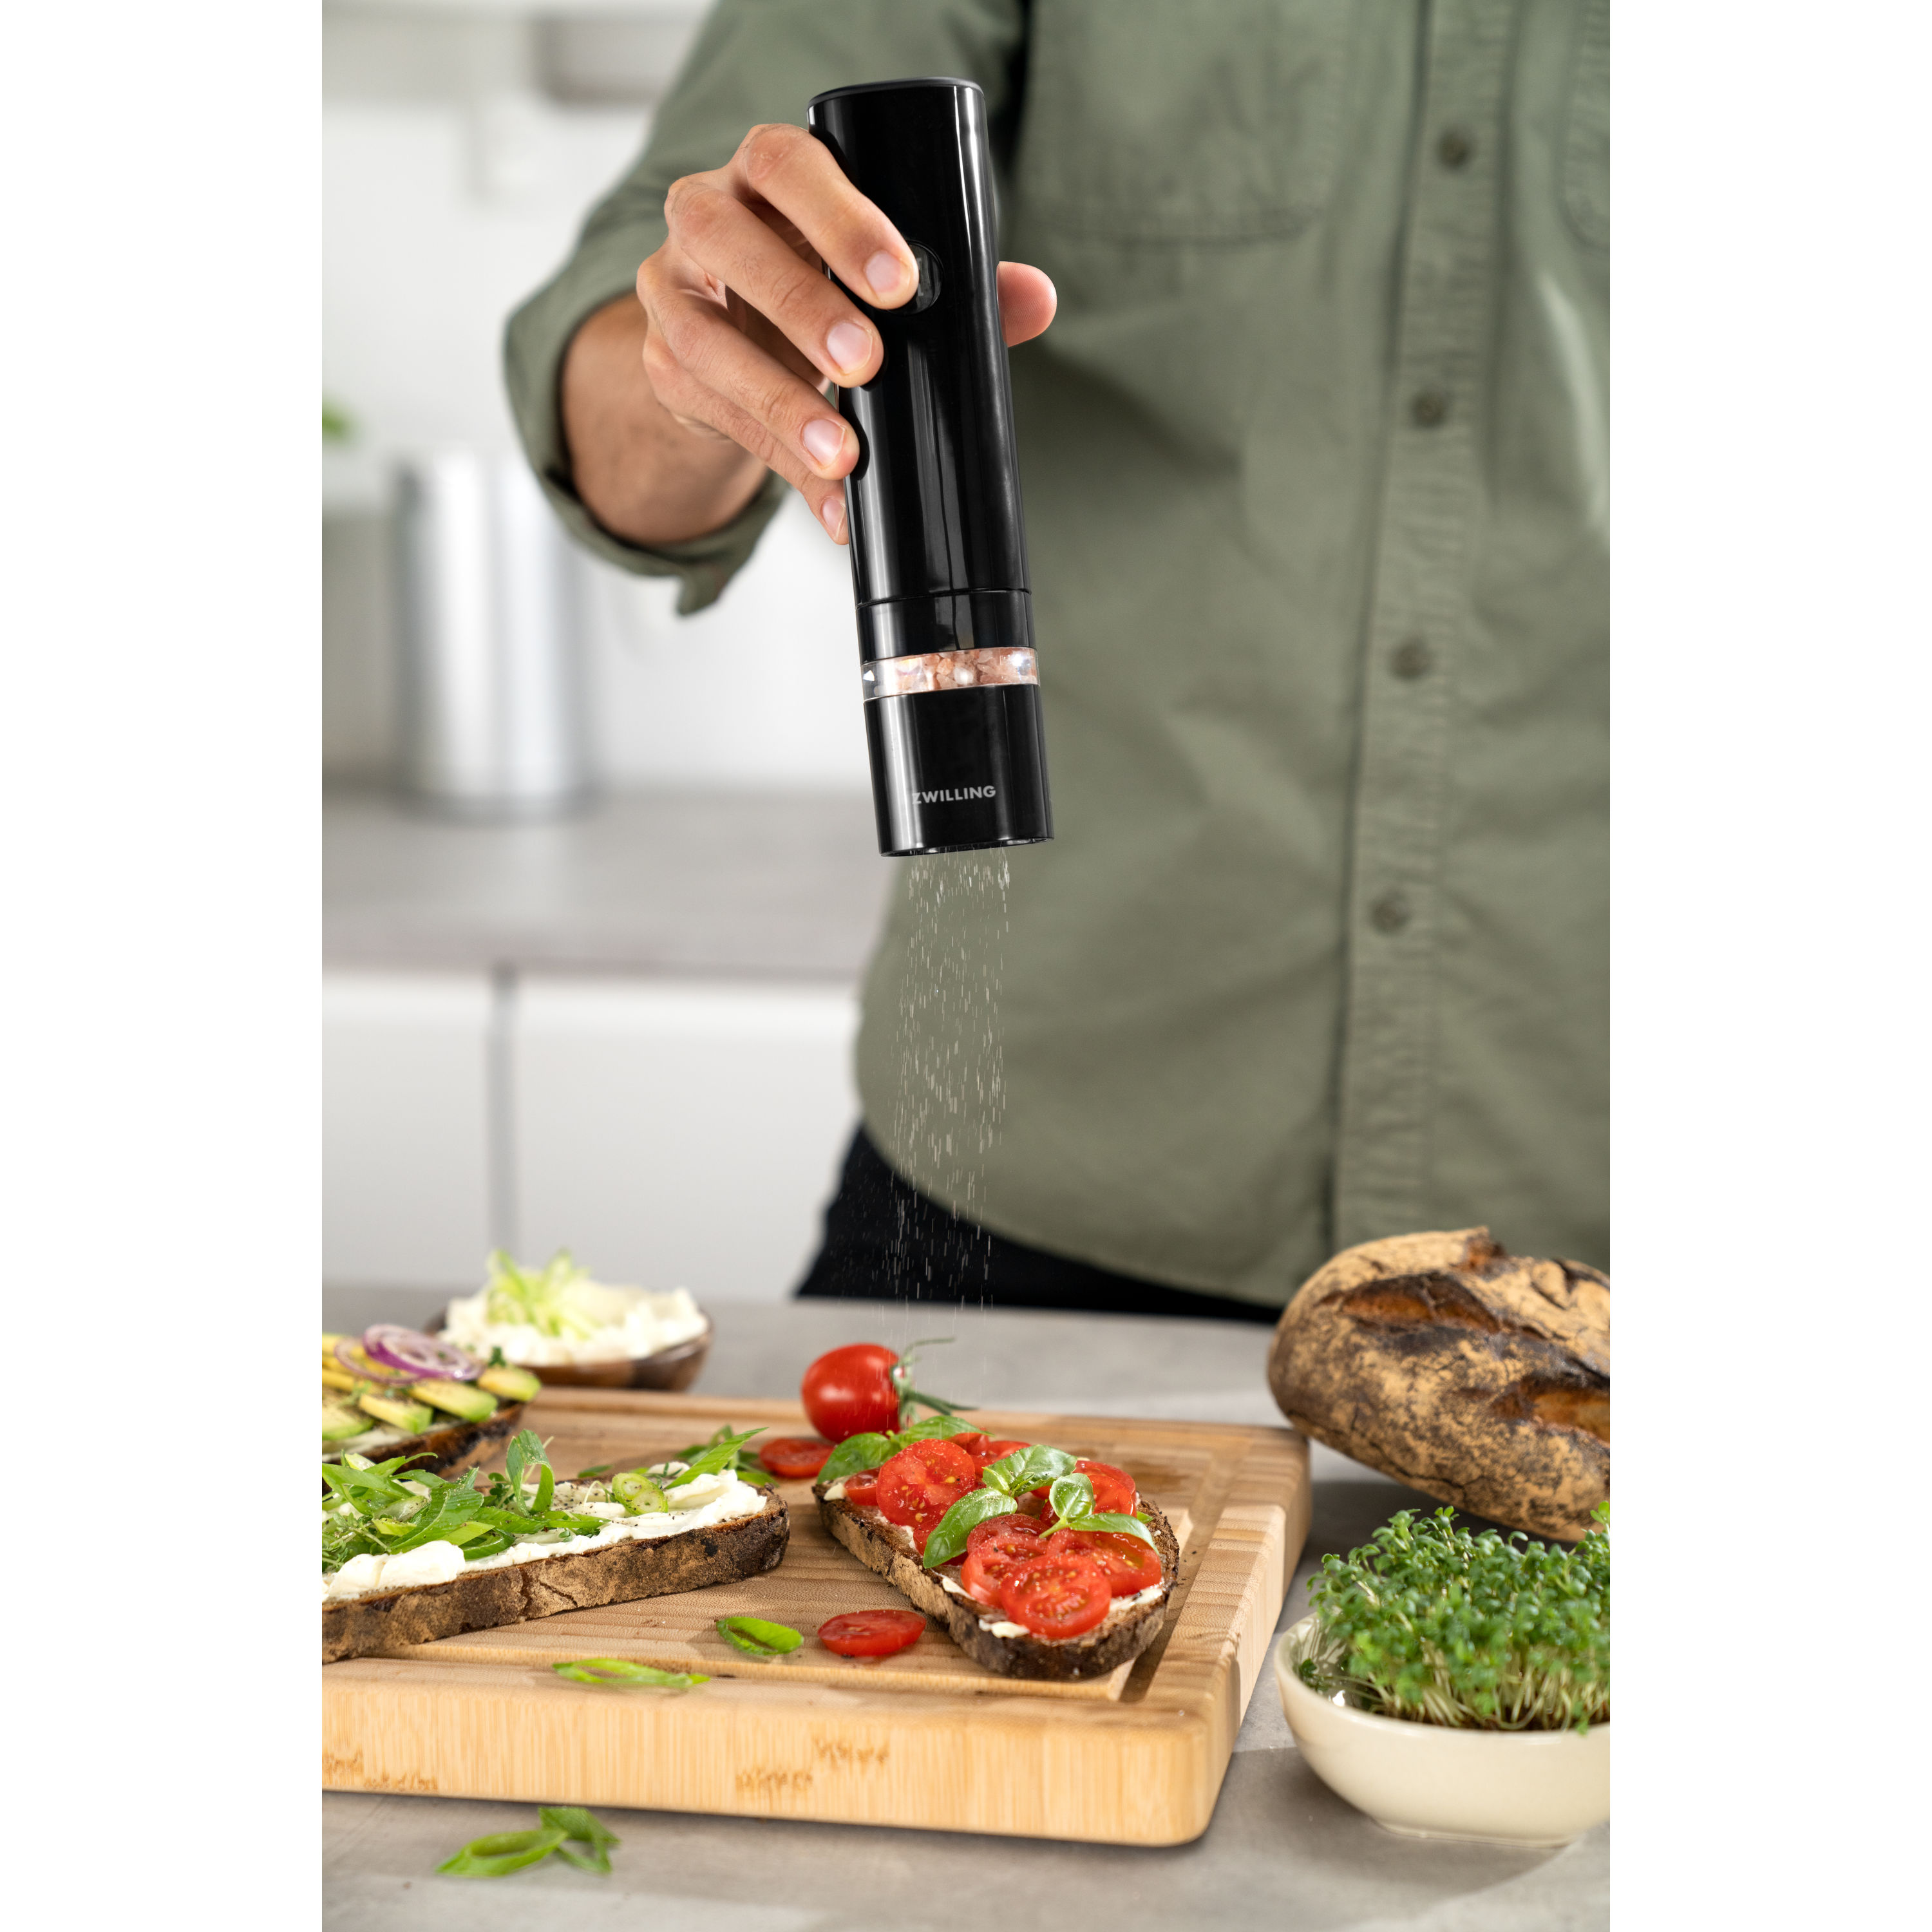 ZWILLING Enfinigy White Electric Salt or Pepper Mill + Reviews